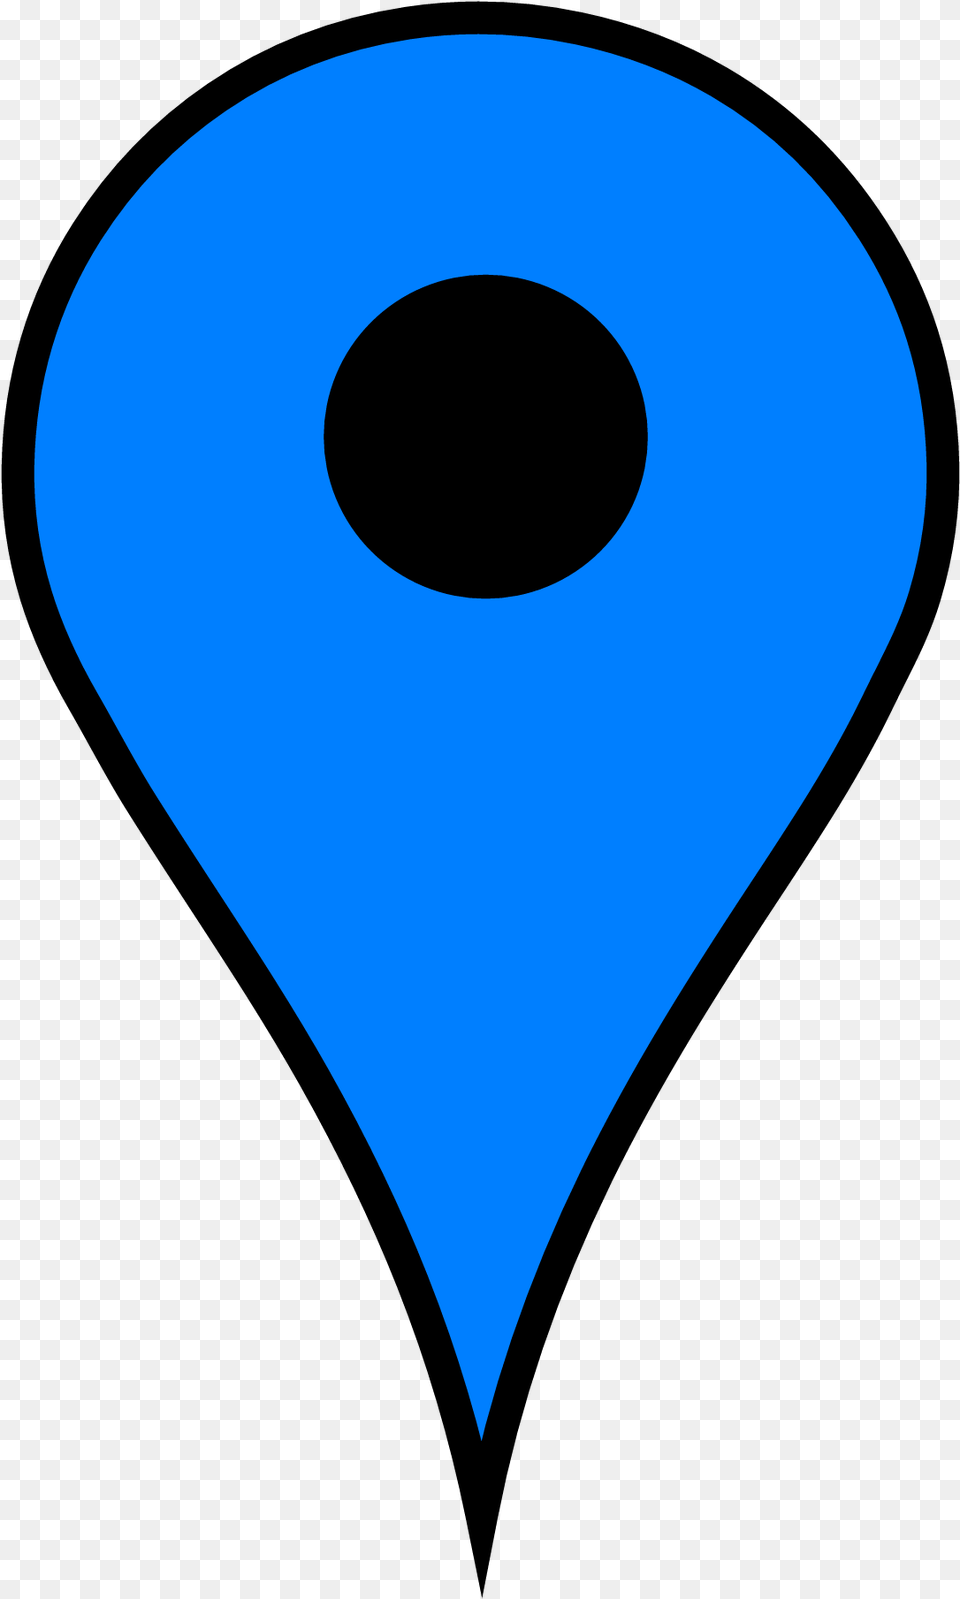 Download Free Map Google Maker Pin Maps Hq Icon Blue Location Pin Transparent Background Png Image